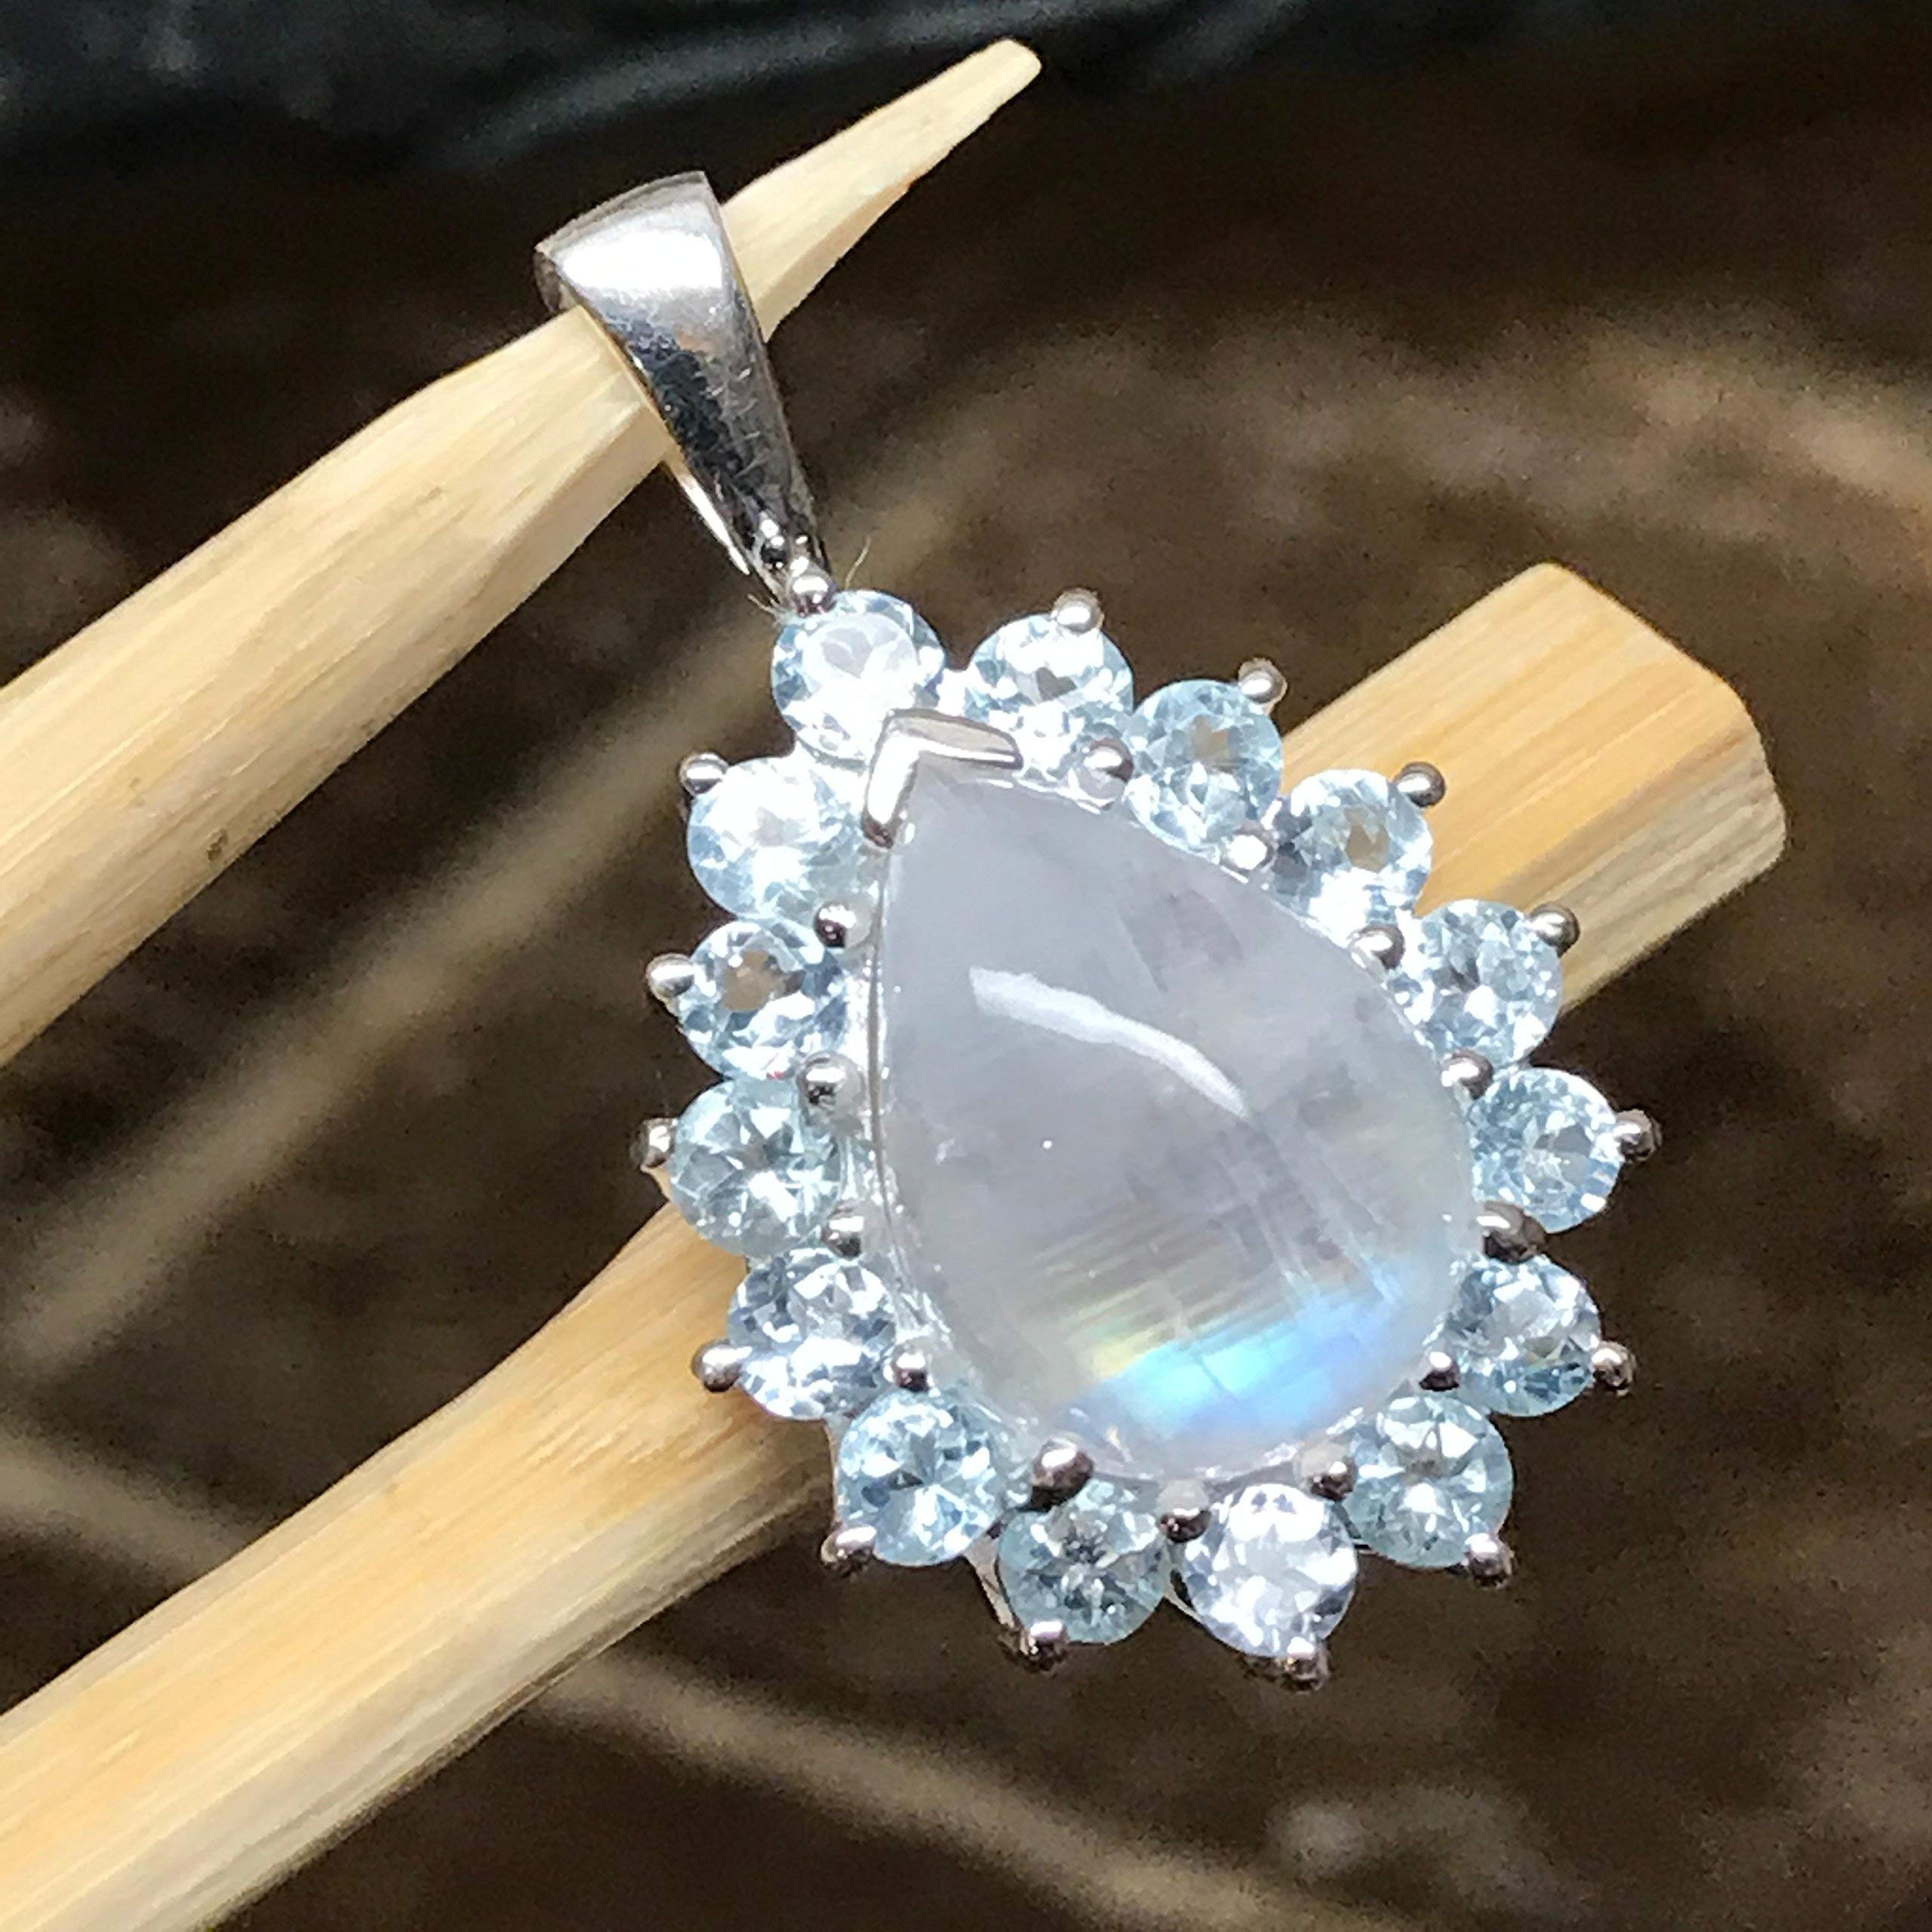 Natural Rainbow Moonstone, Blue Topaz 925 Solid Sterling Silver Pendant 28mm - Natural Rocks by Kala